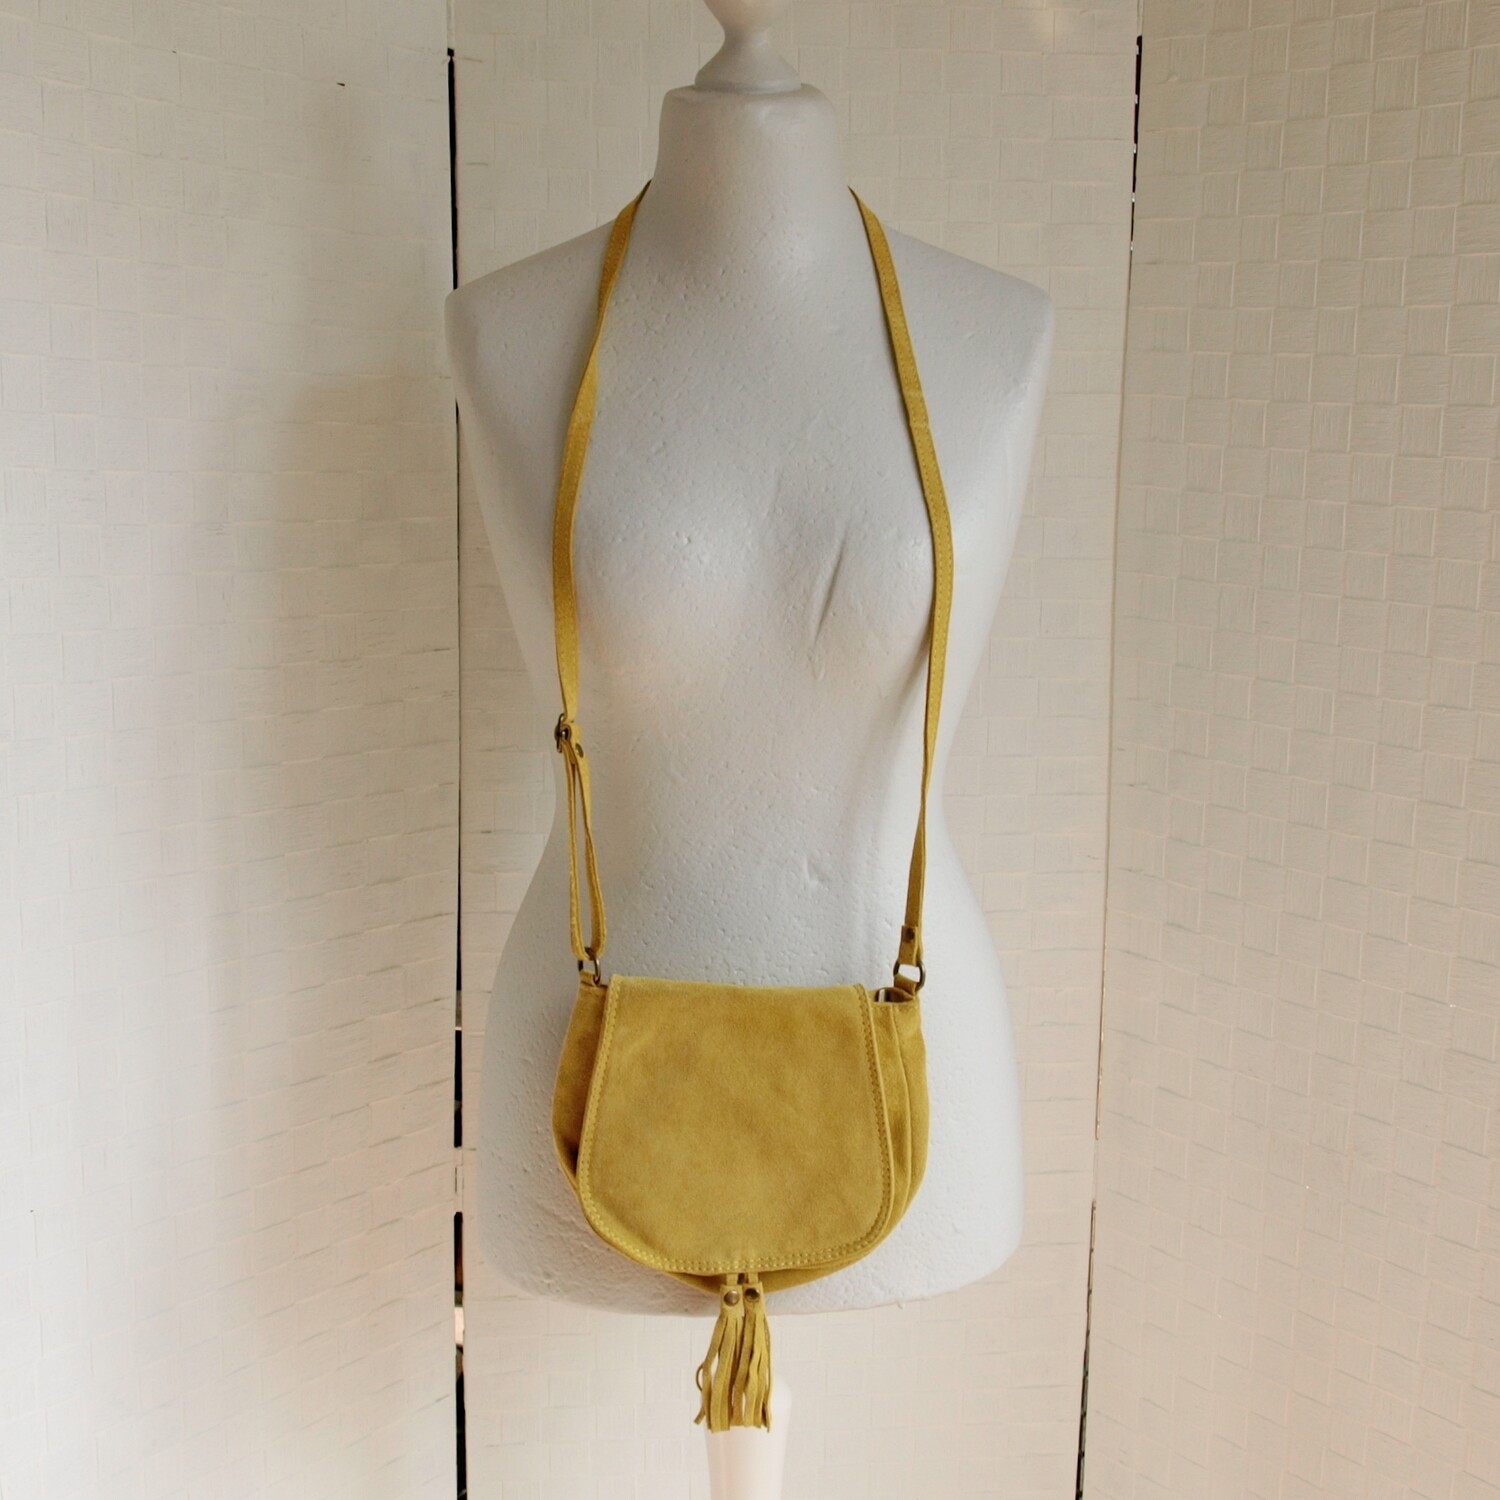 Ladies Yellow Suede Tassel Saddle Bag by Crazy Lou of Paris - Made in Italy